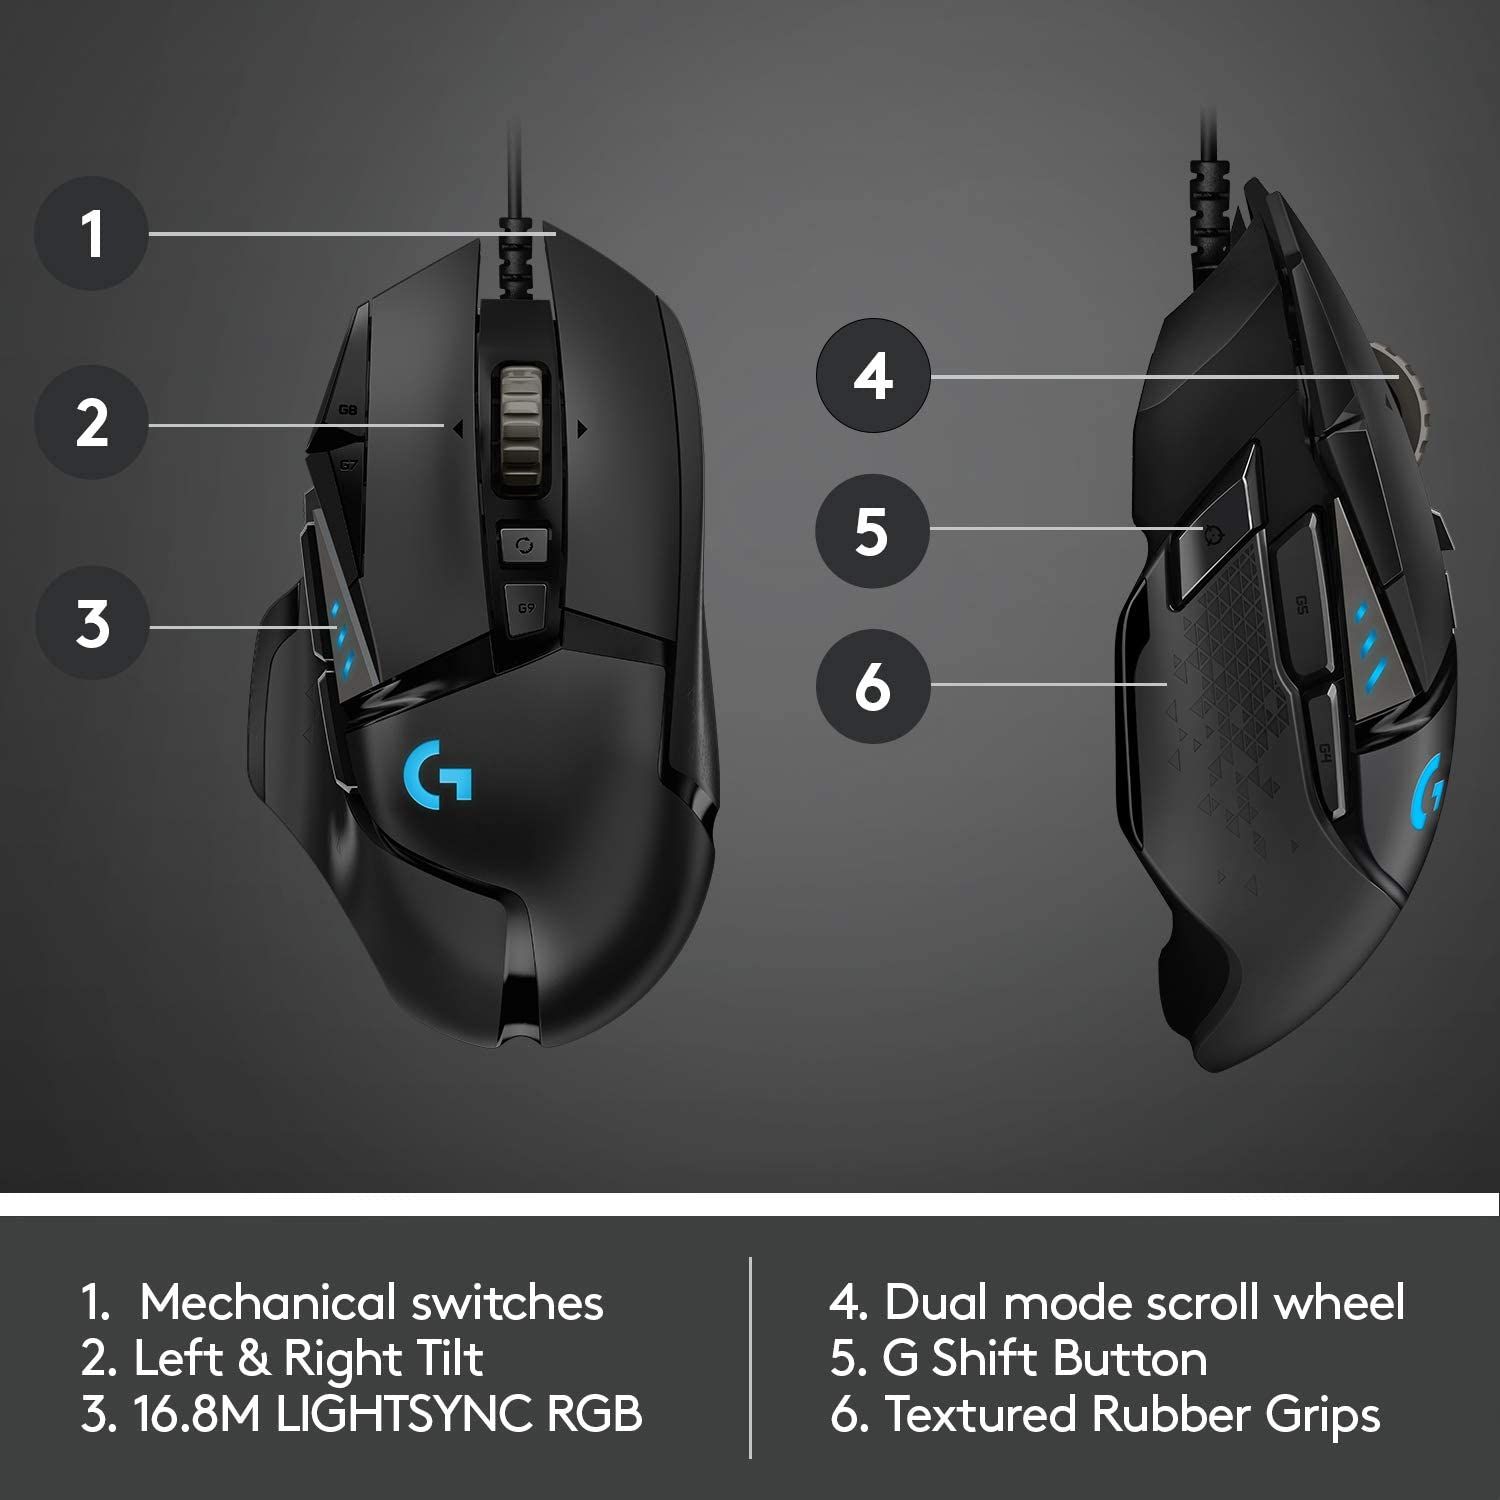 The form factor features of Logitech G502 HERO